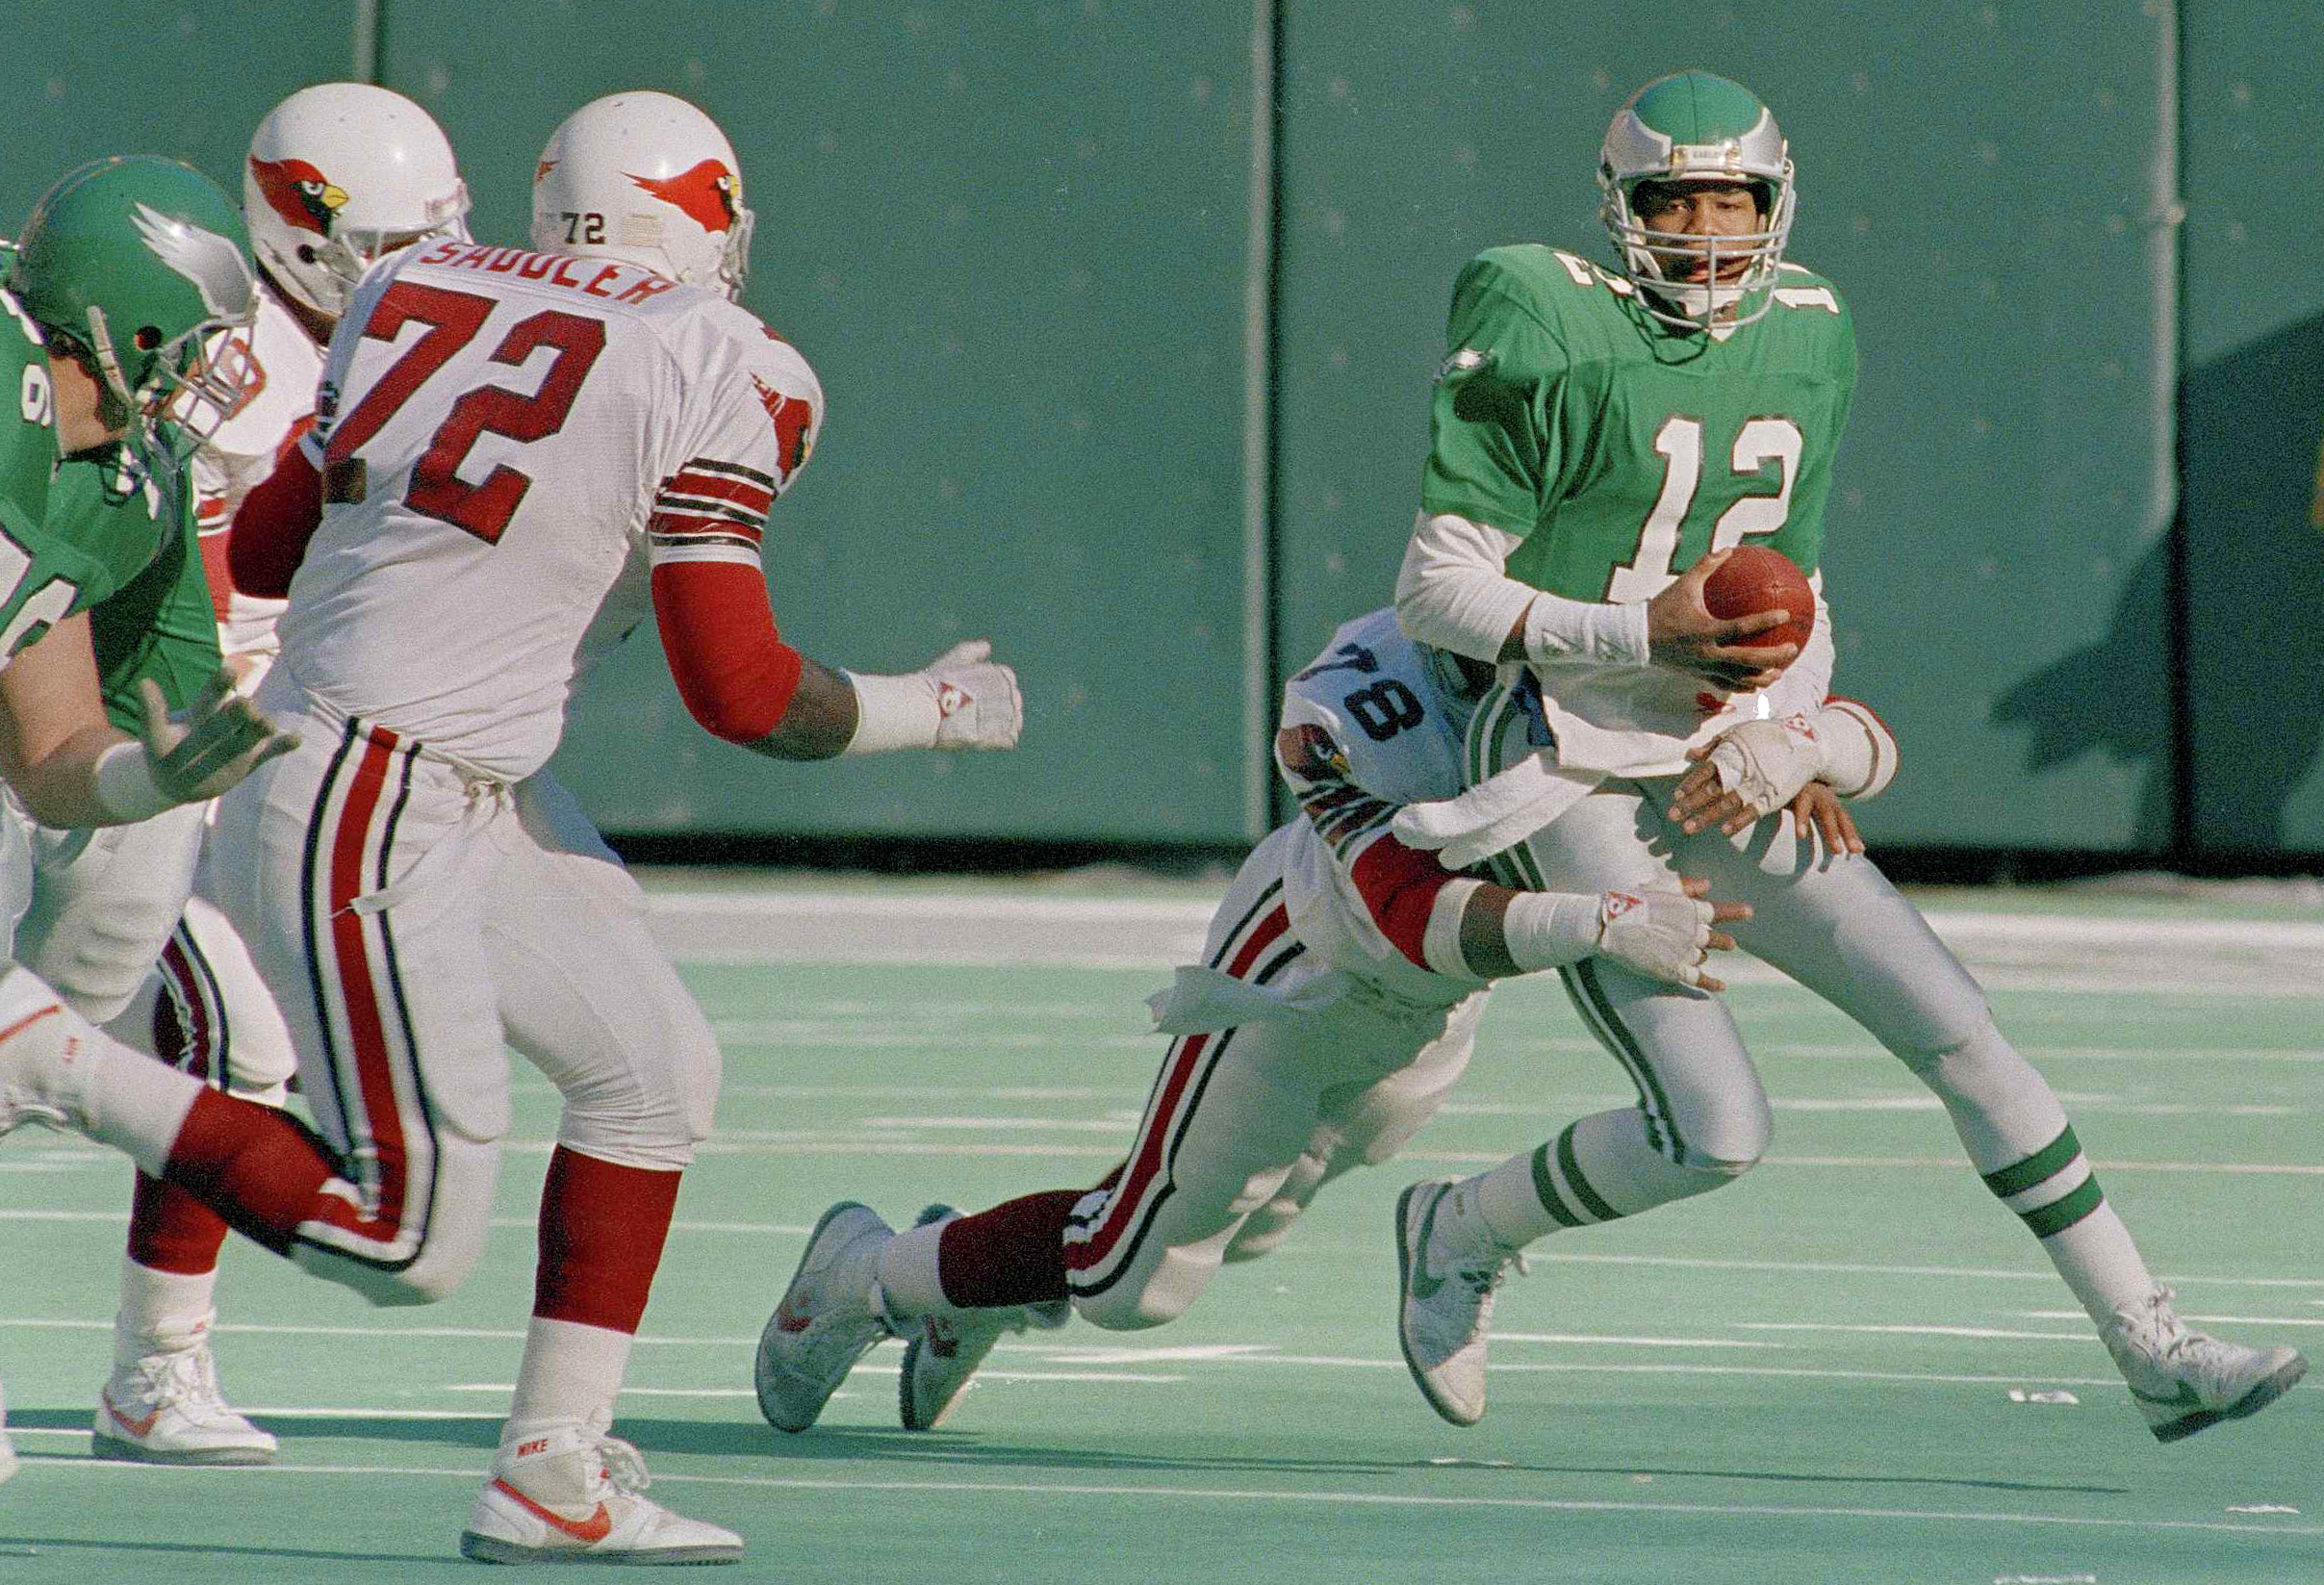 Where to buy Eagles Kelly Green throwback uniforms: purchase